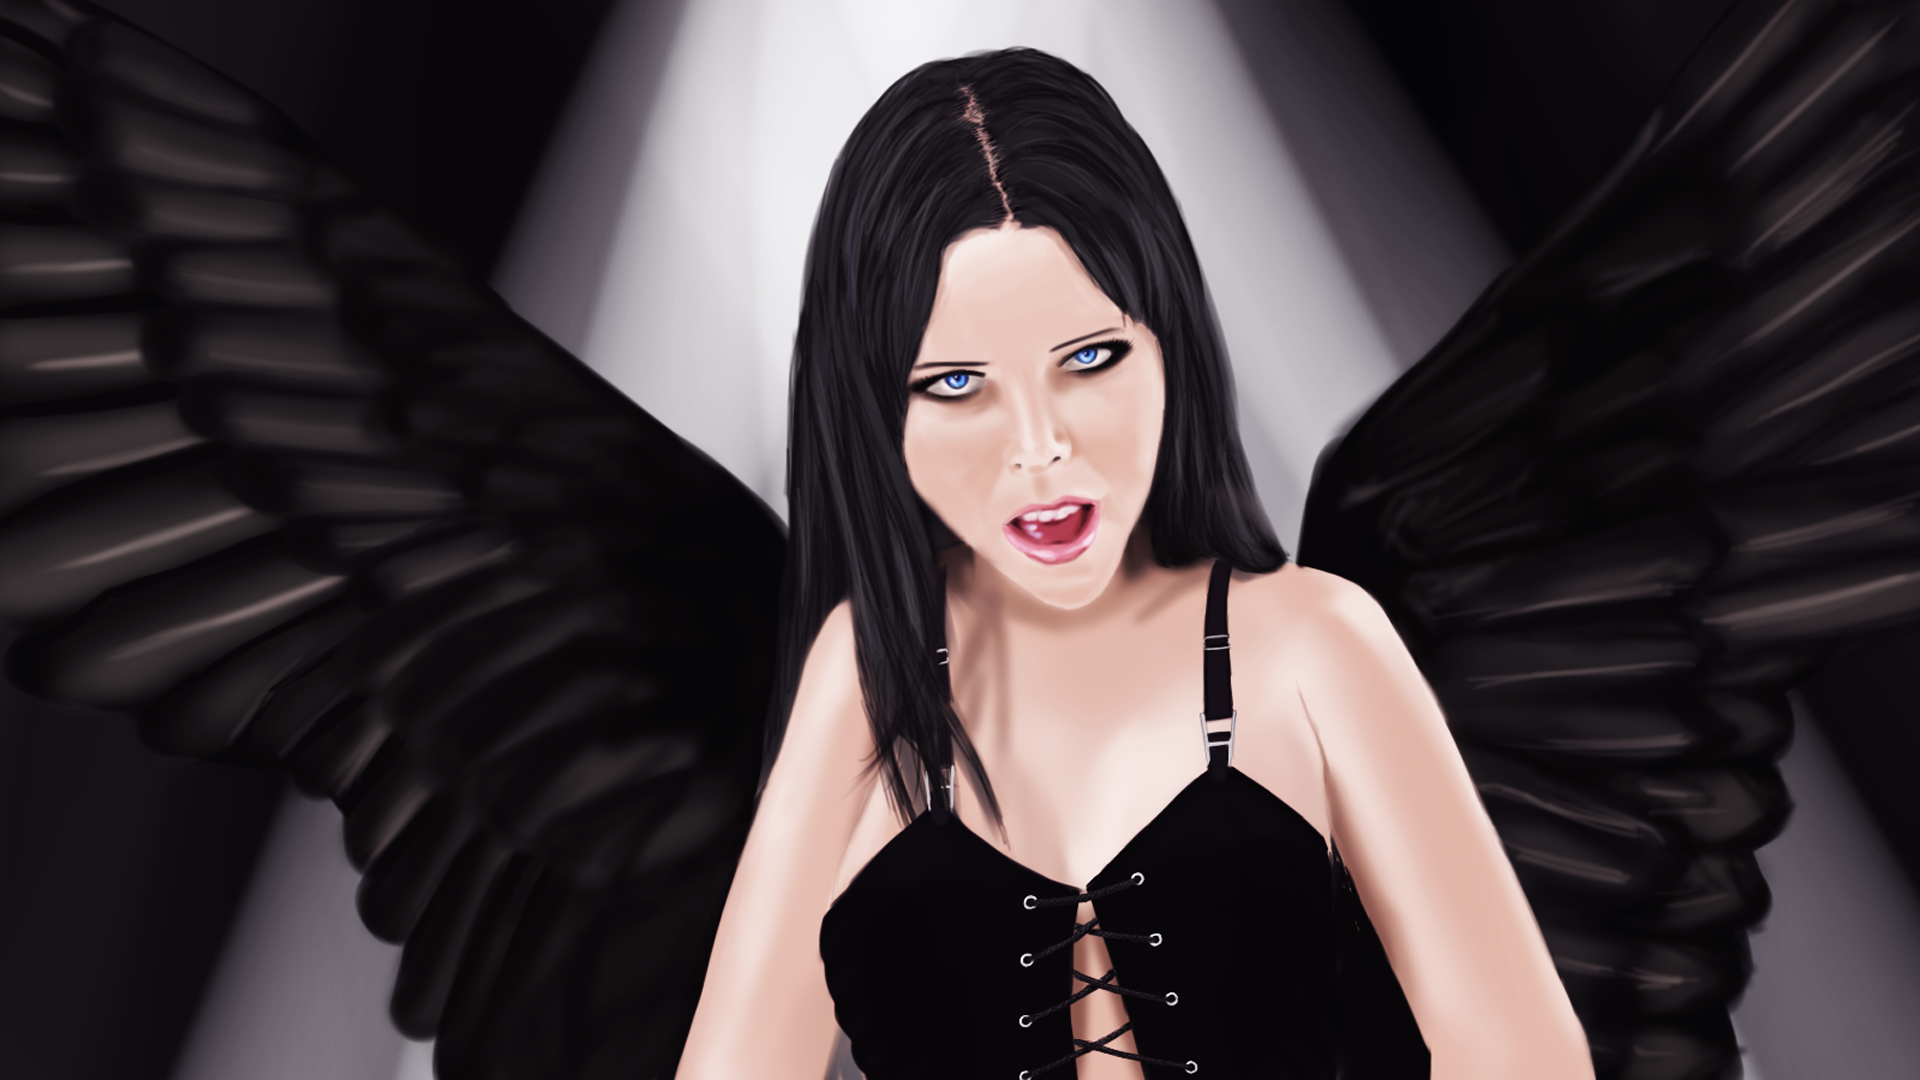 random_angel_ish_looking_human_female_by_alyxms-d8mpcme.png